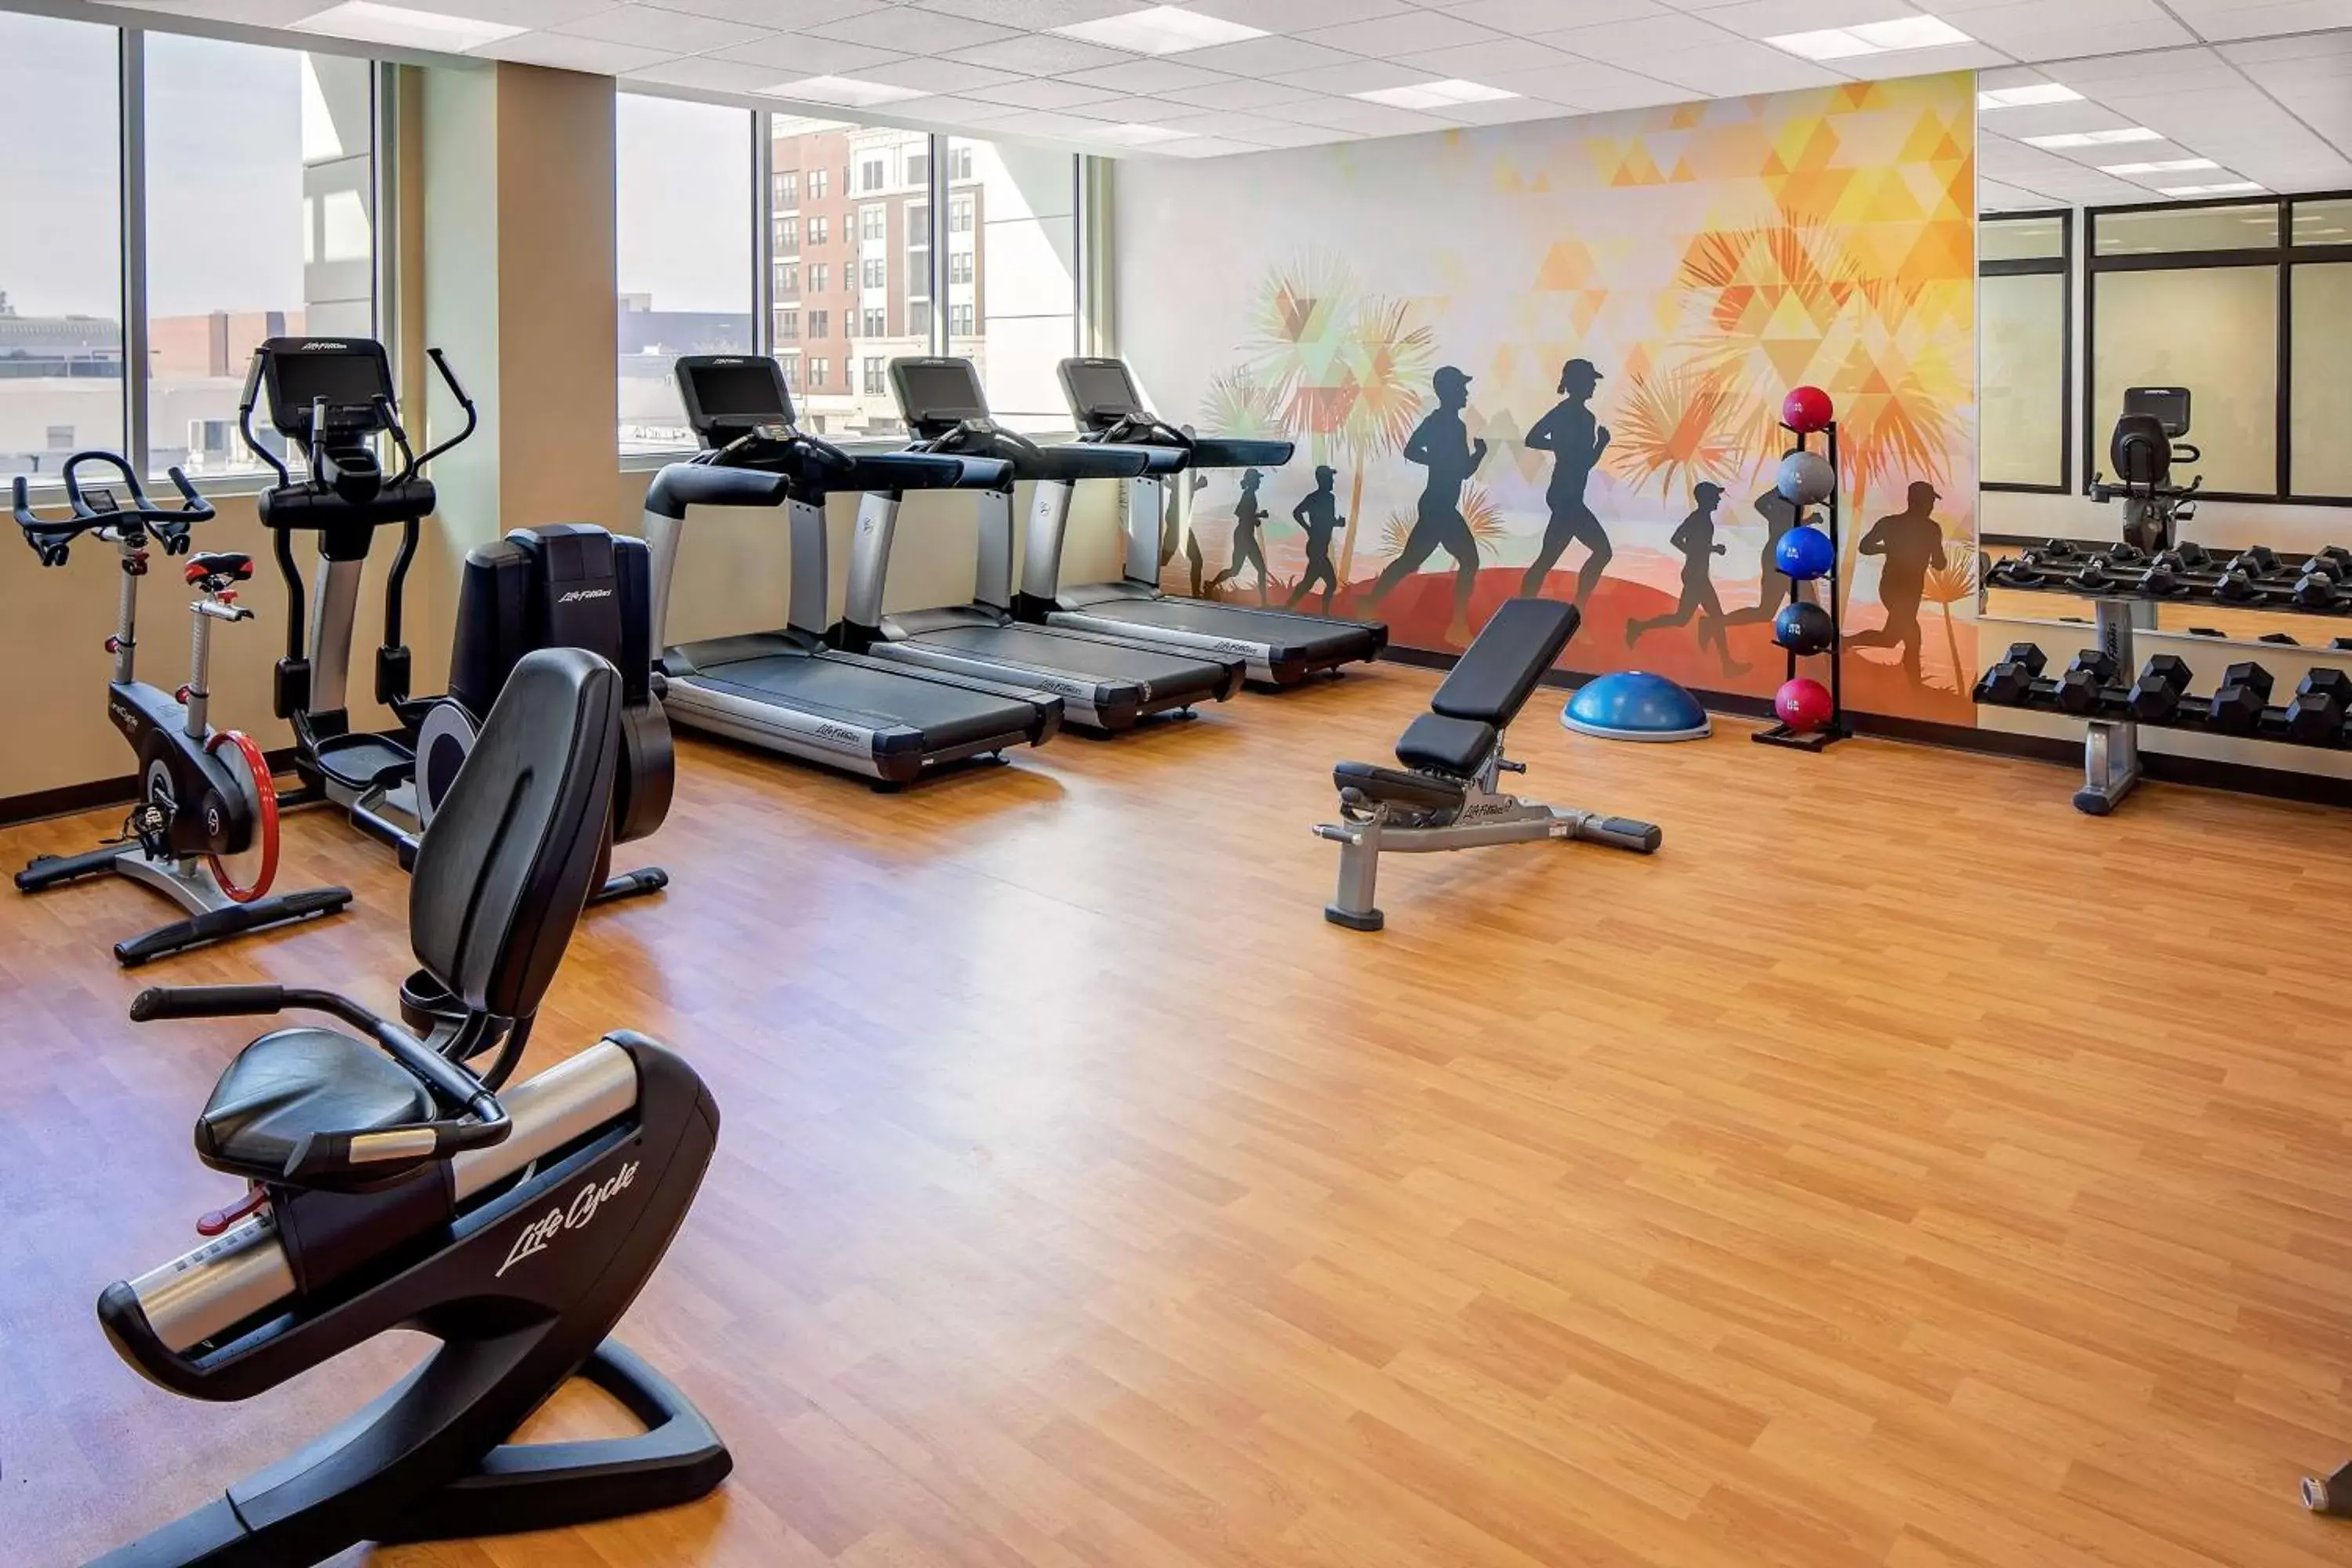 Fitness centre/facilities, Fitness Center/Facilities in Hyatt Place Glendale/Los Angeles